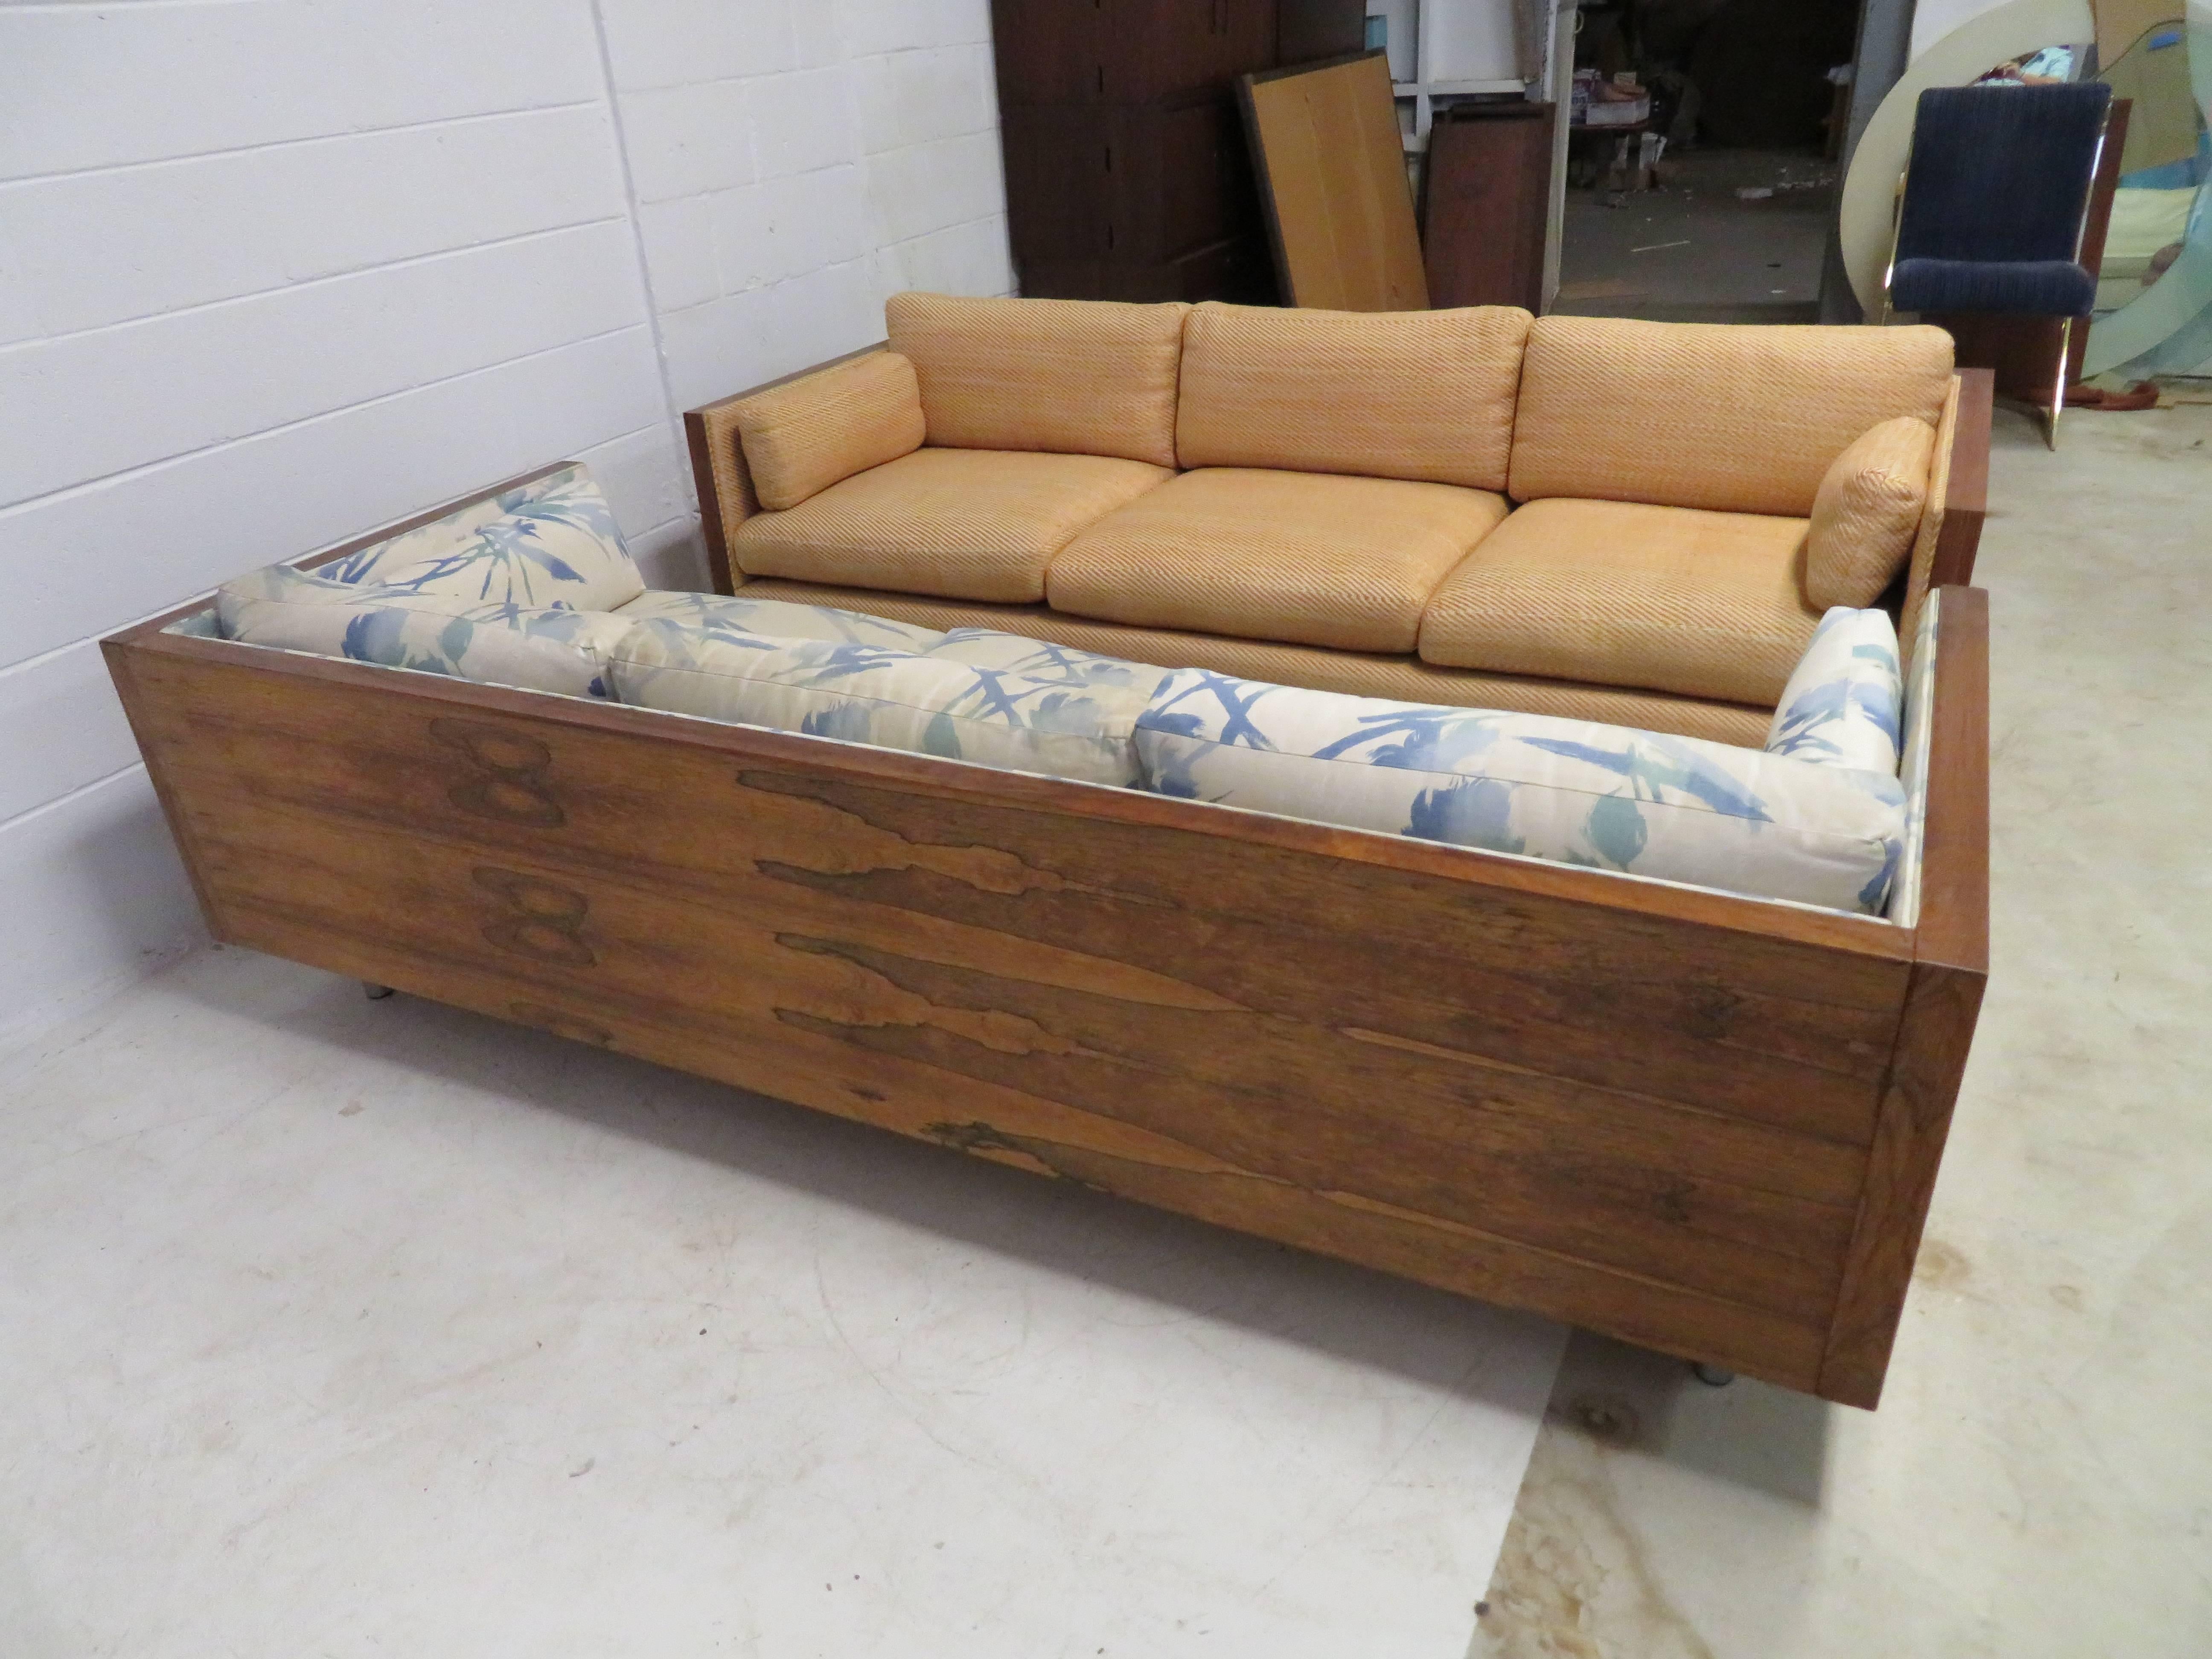 Gorgeous pair of Milo Baughman style rosewood case sofas. Each sofa is in very nice original vintage condition retaining their original finish and upholstery. They will both need upholstery but that's what you designers are looking for anyway-right?